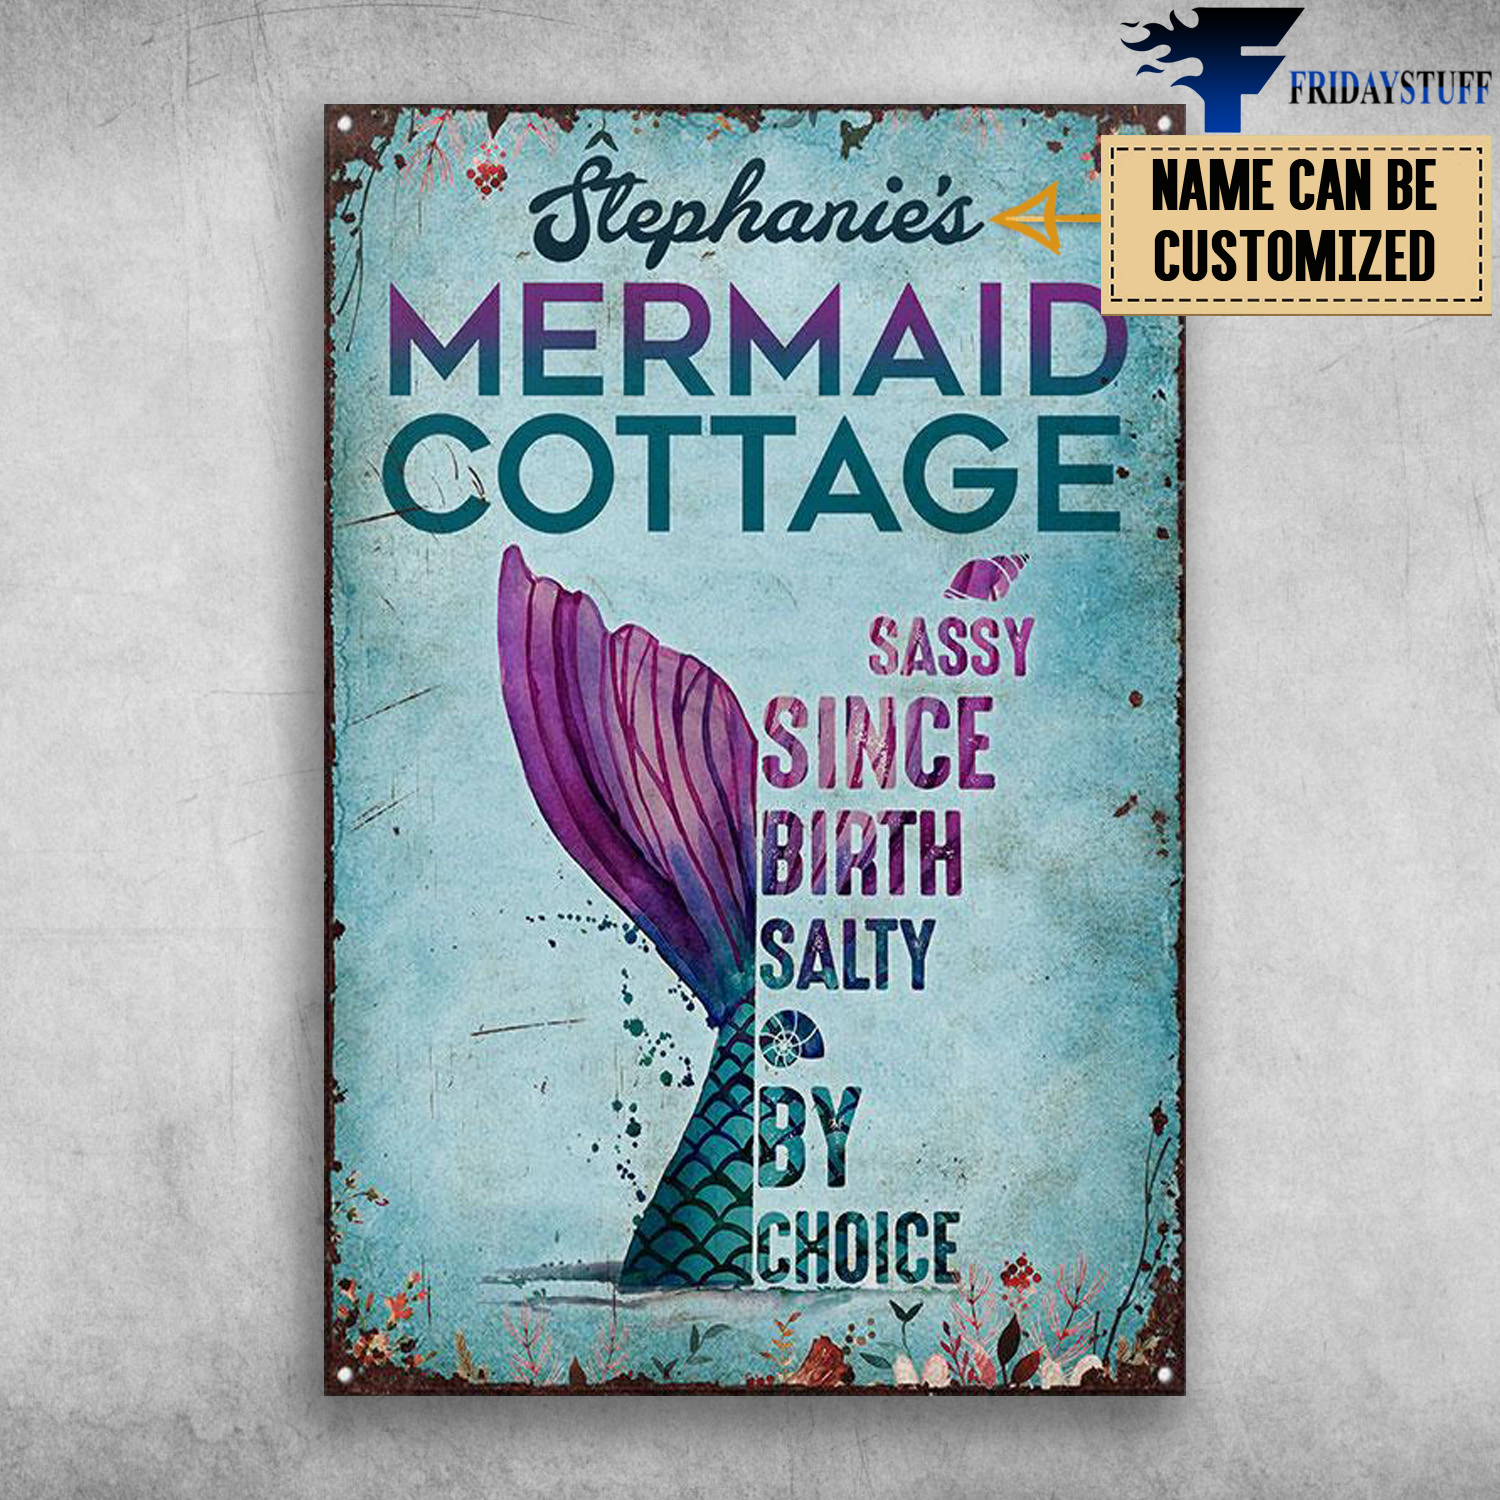 Mermaid Cottage, Sassy Since Birth Salty By Choice, The Ocean